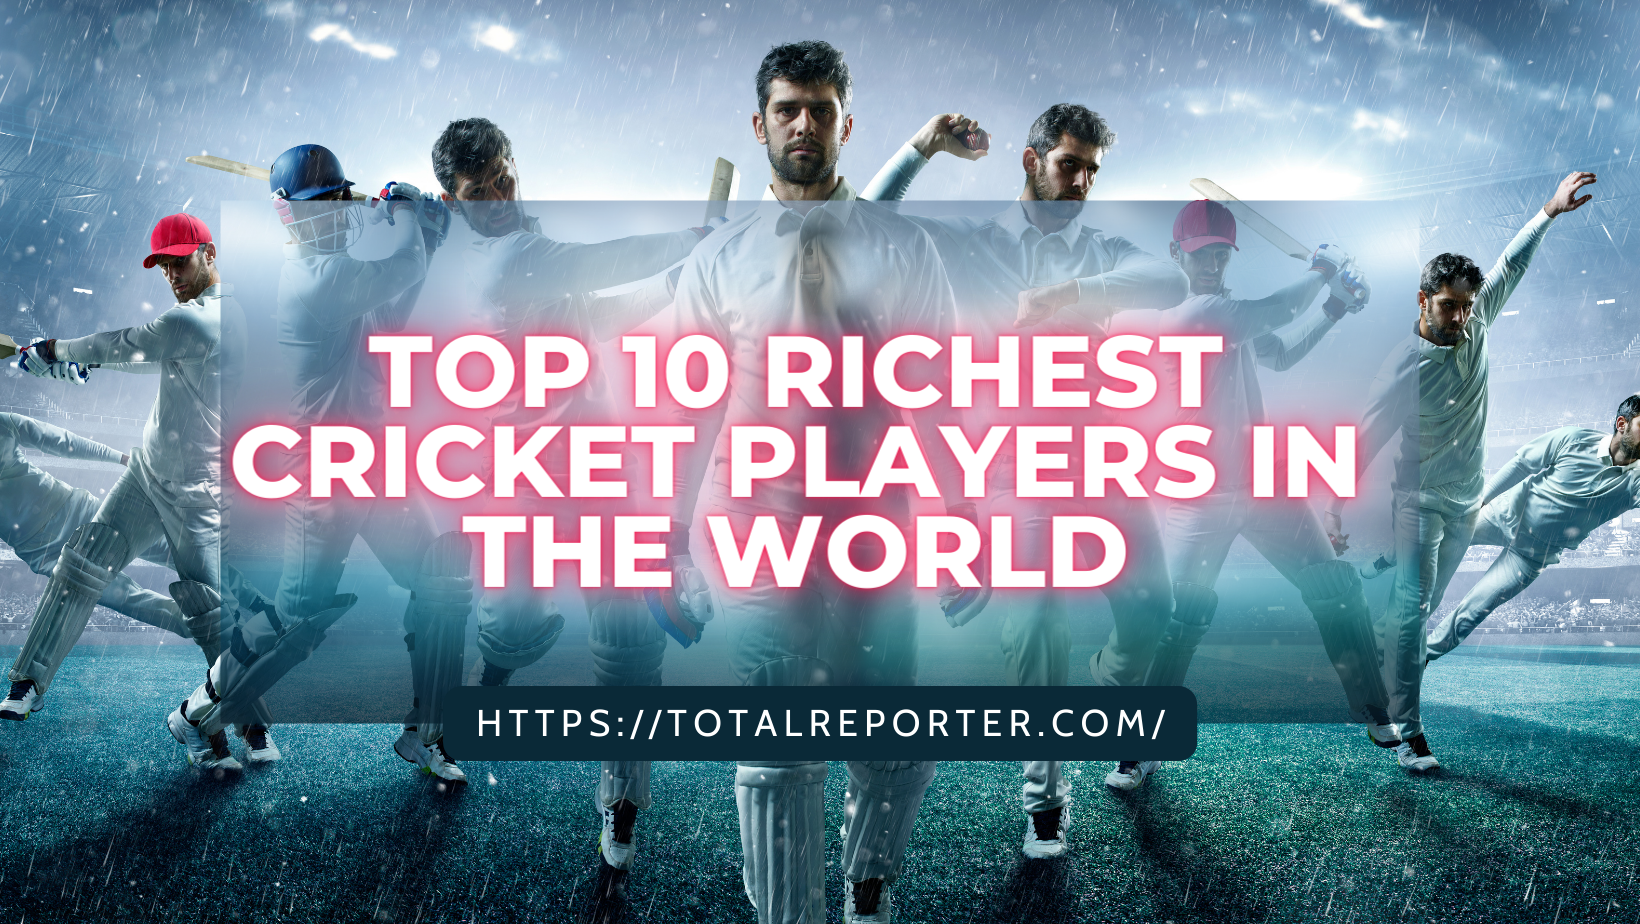 Top 10 Richest Cricket Players In The World